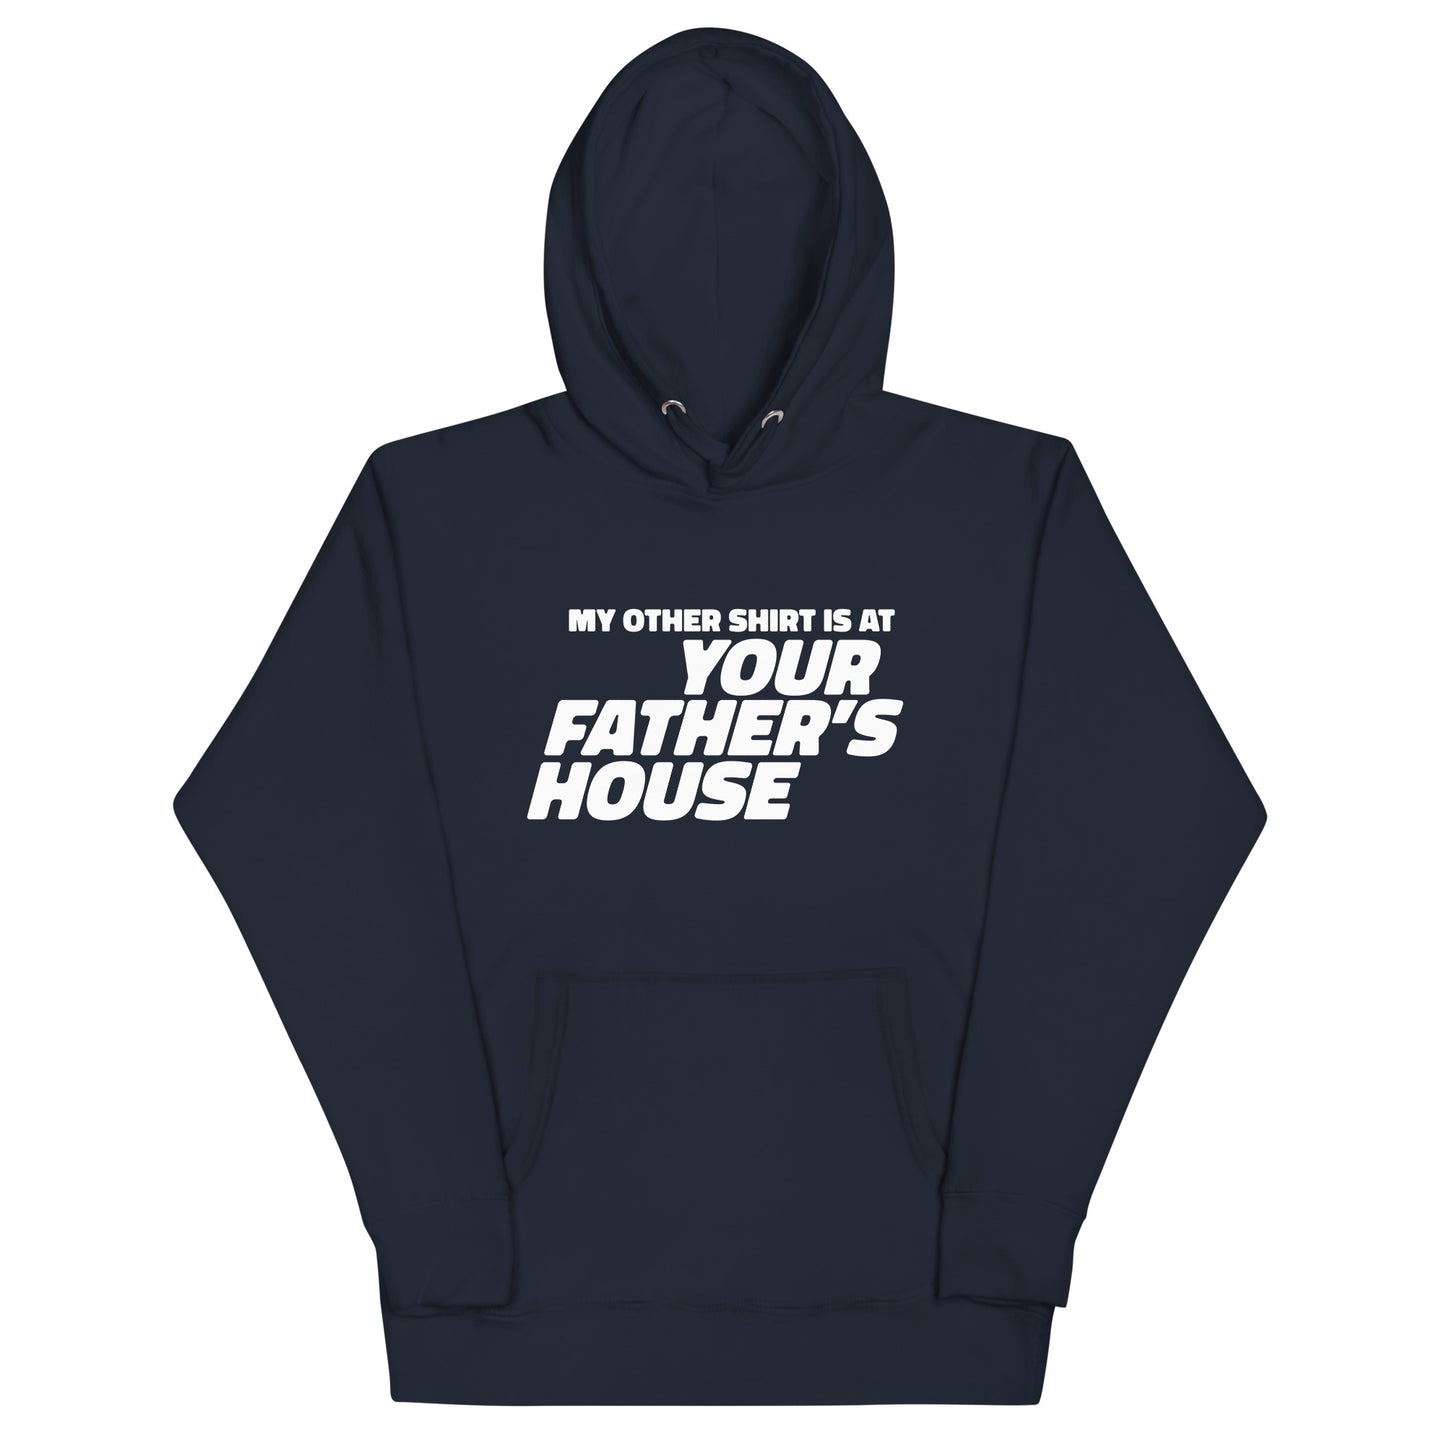 My Other Shirt is at Your Father's House Unisex Hoodie